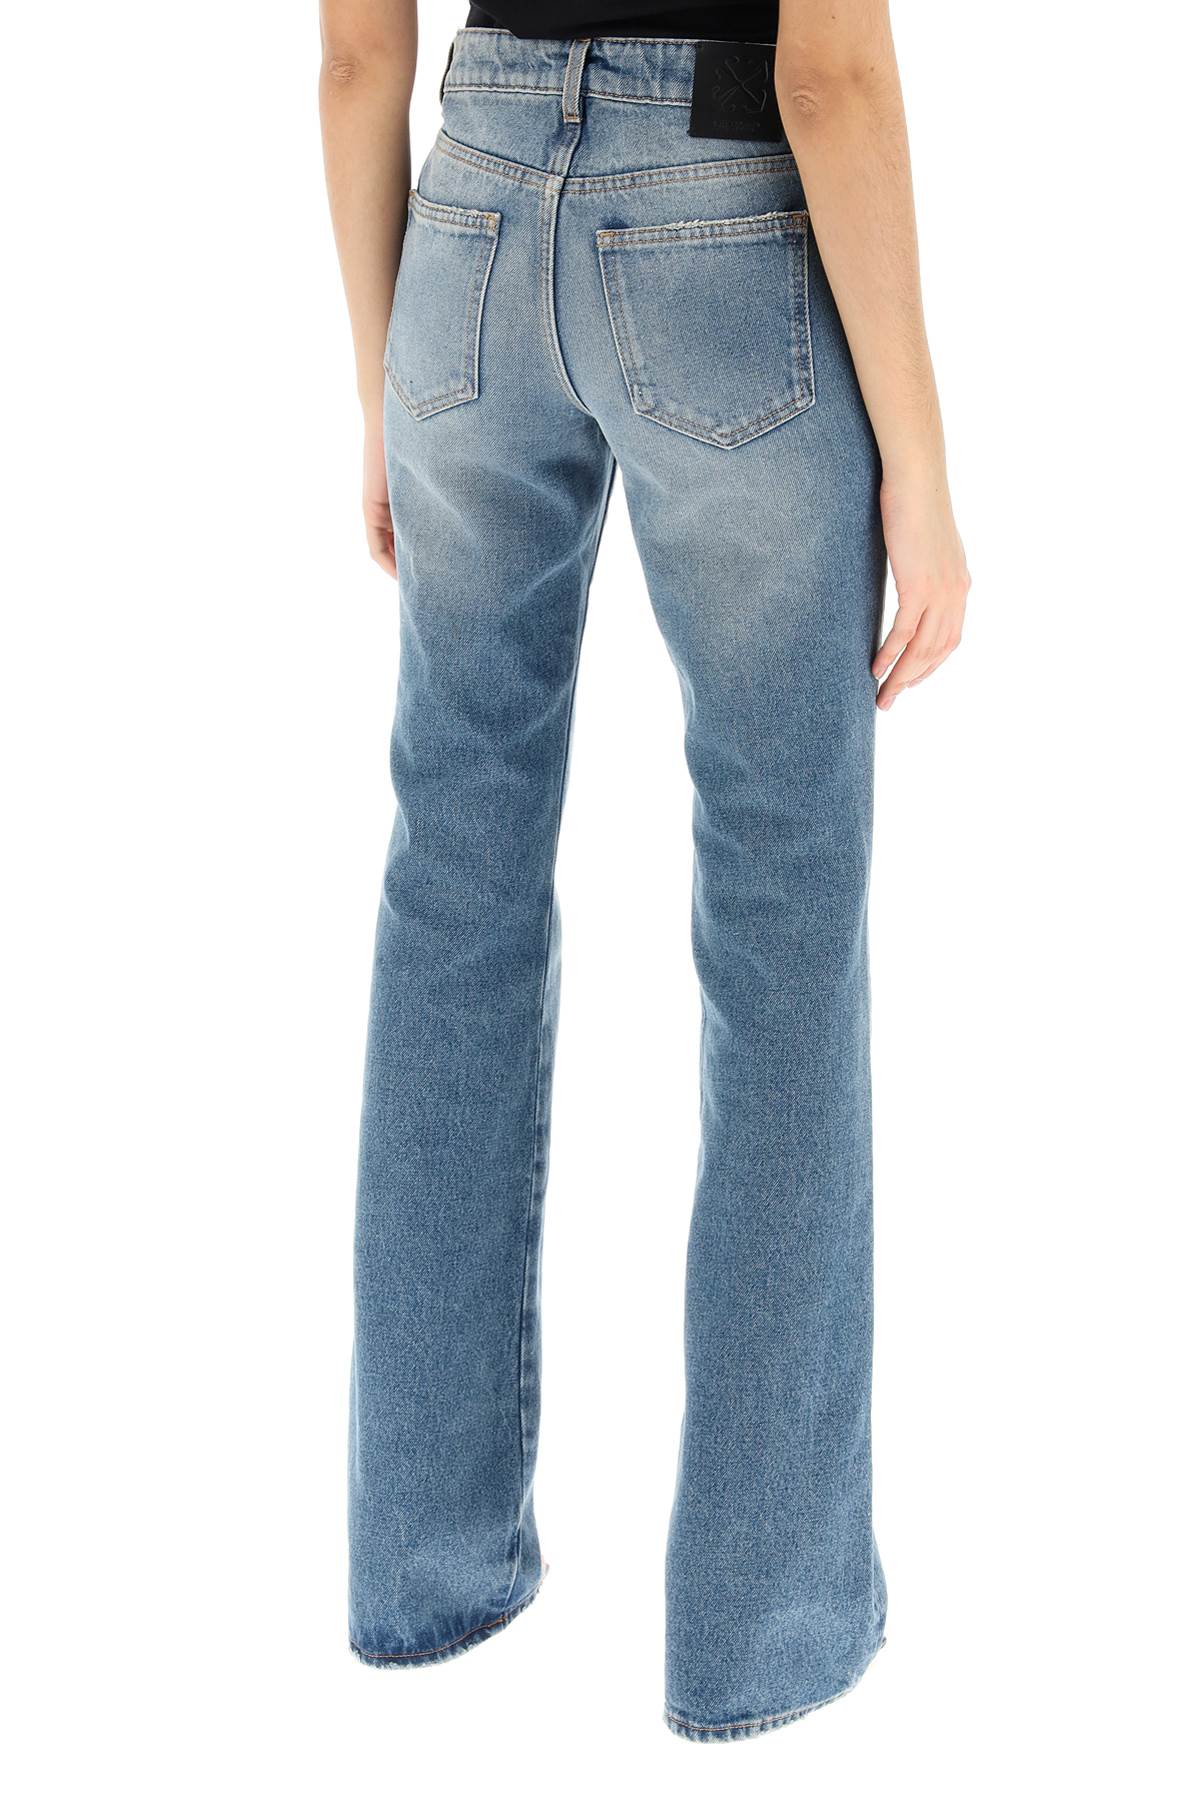 Off-white bootcut jeans-2